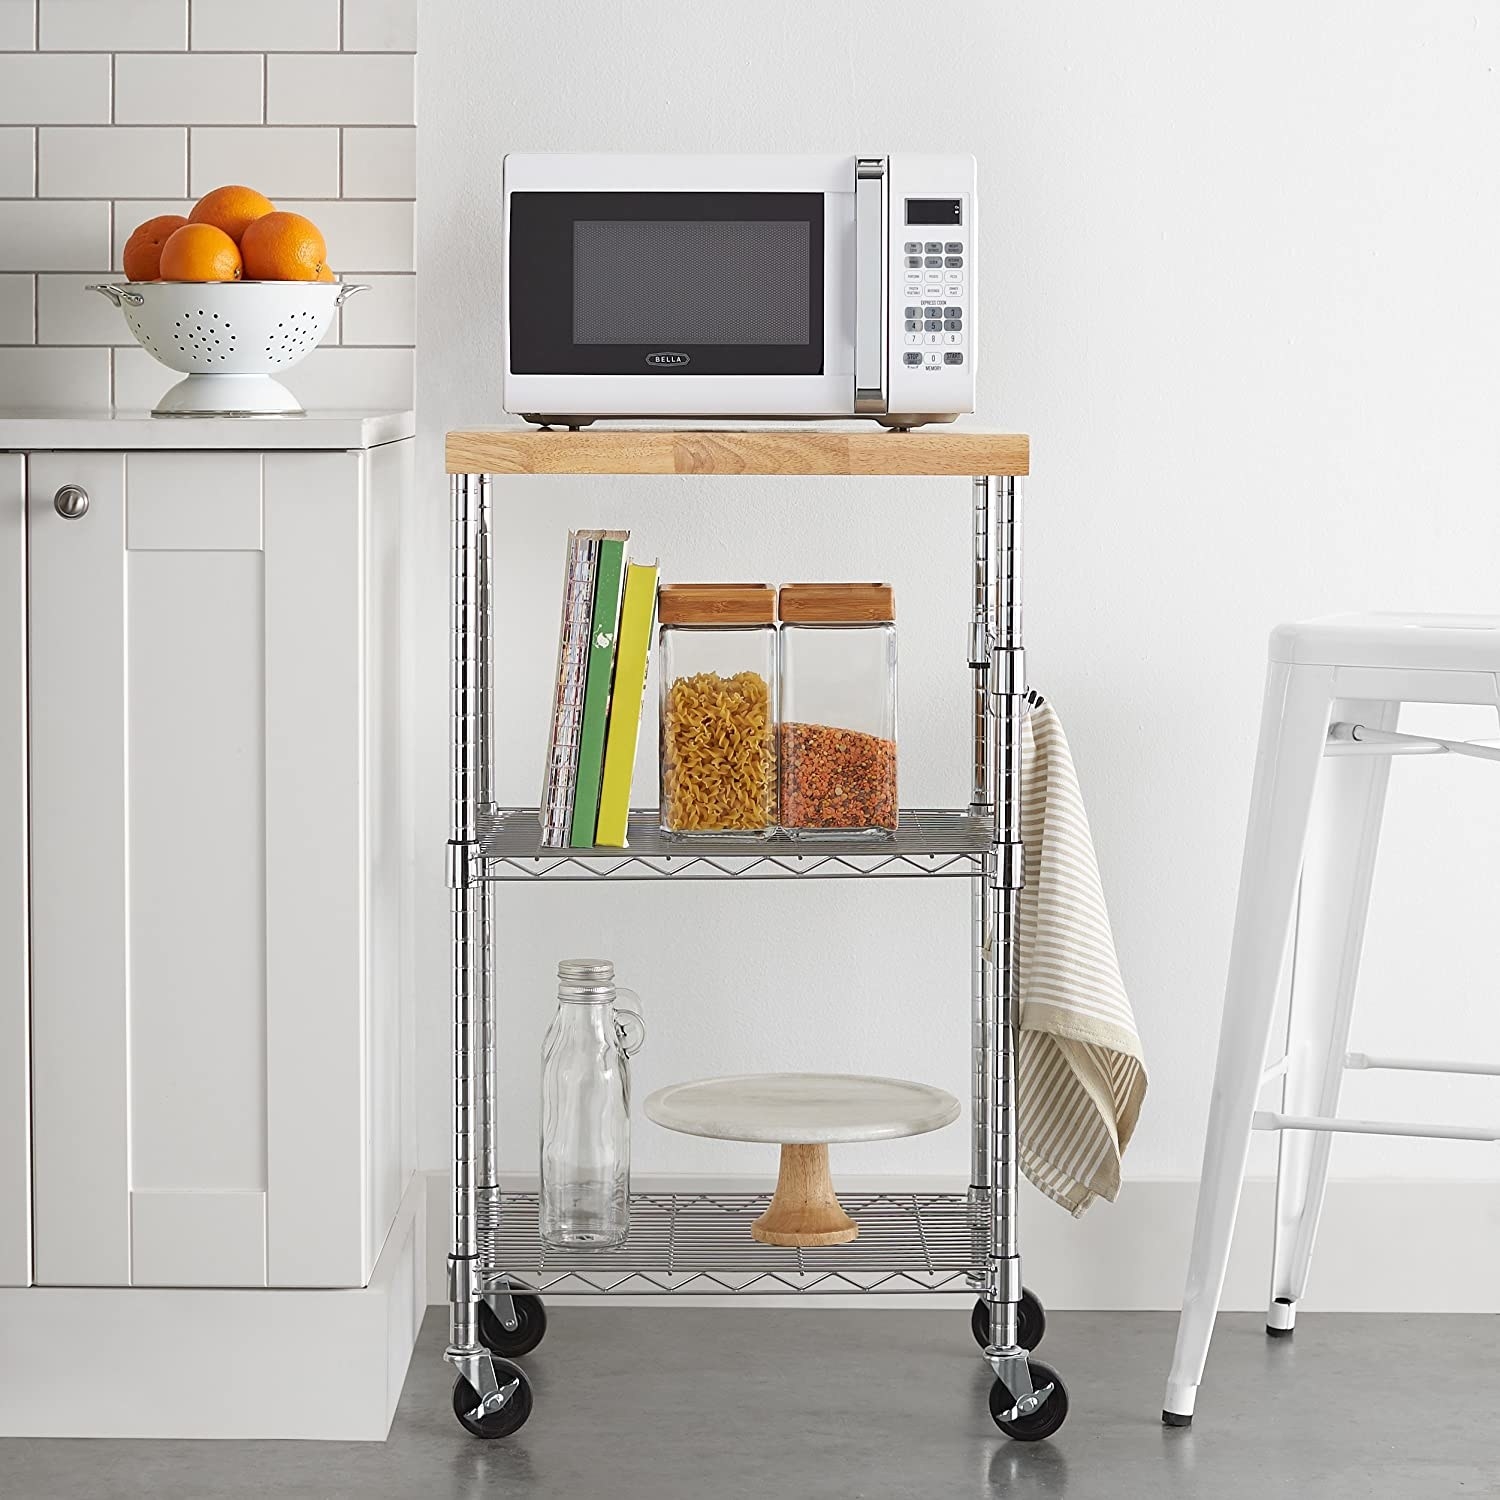 The rolling cart in a kitchen with pasta, cookbooks, and display items on it